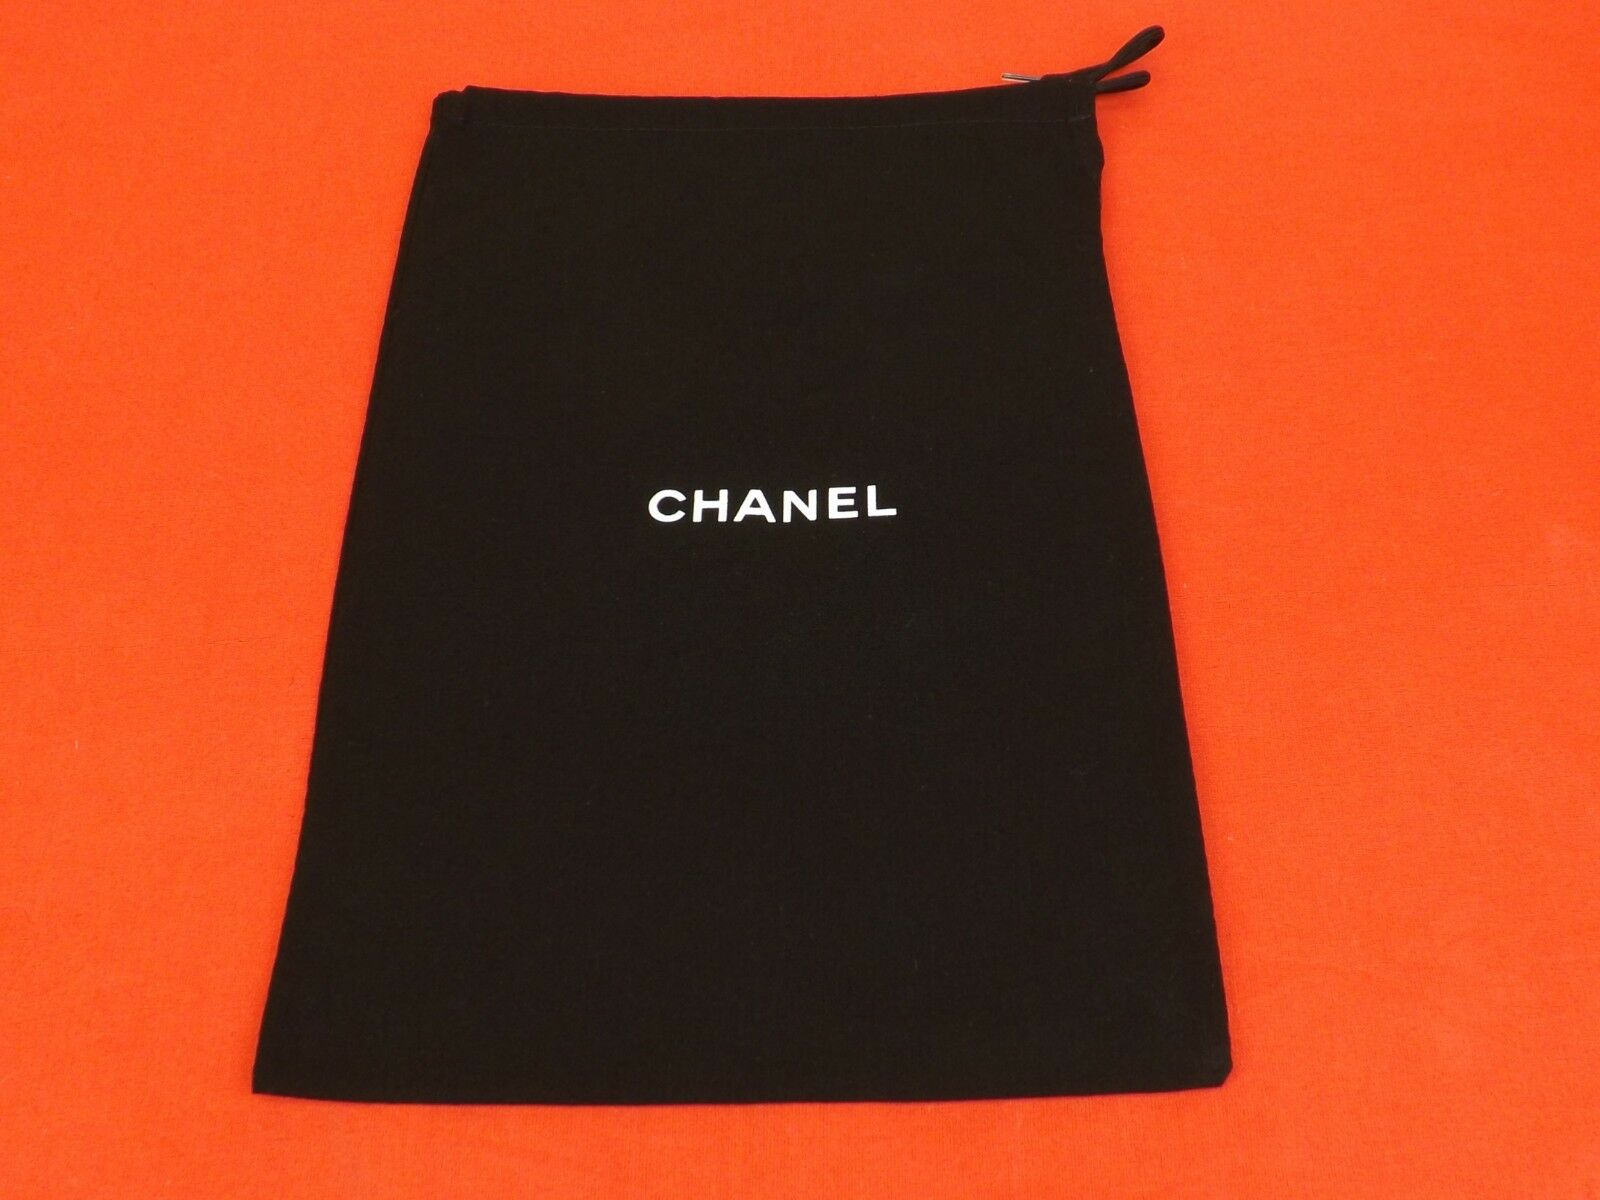 New Chanel Black Dust Bag For Shoes Or Clutch Purse  8 1/2" X 15"